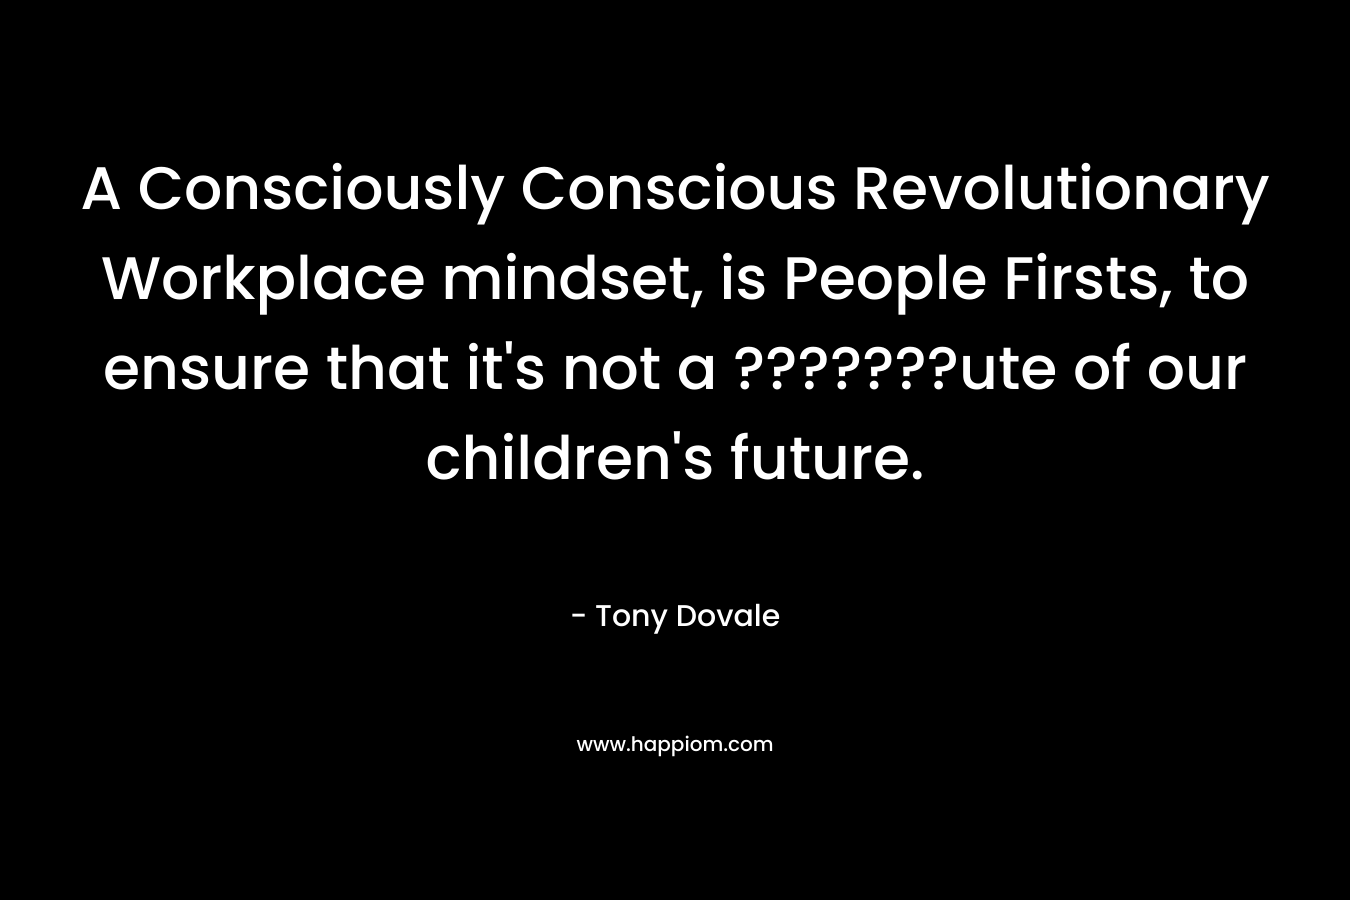 A Consciously Conscious Revolutionary Workplace mindset, is People Firsts, to ensure that it’s not a ???????ute of our children’s future. – Tony Dovale